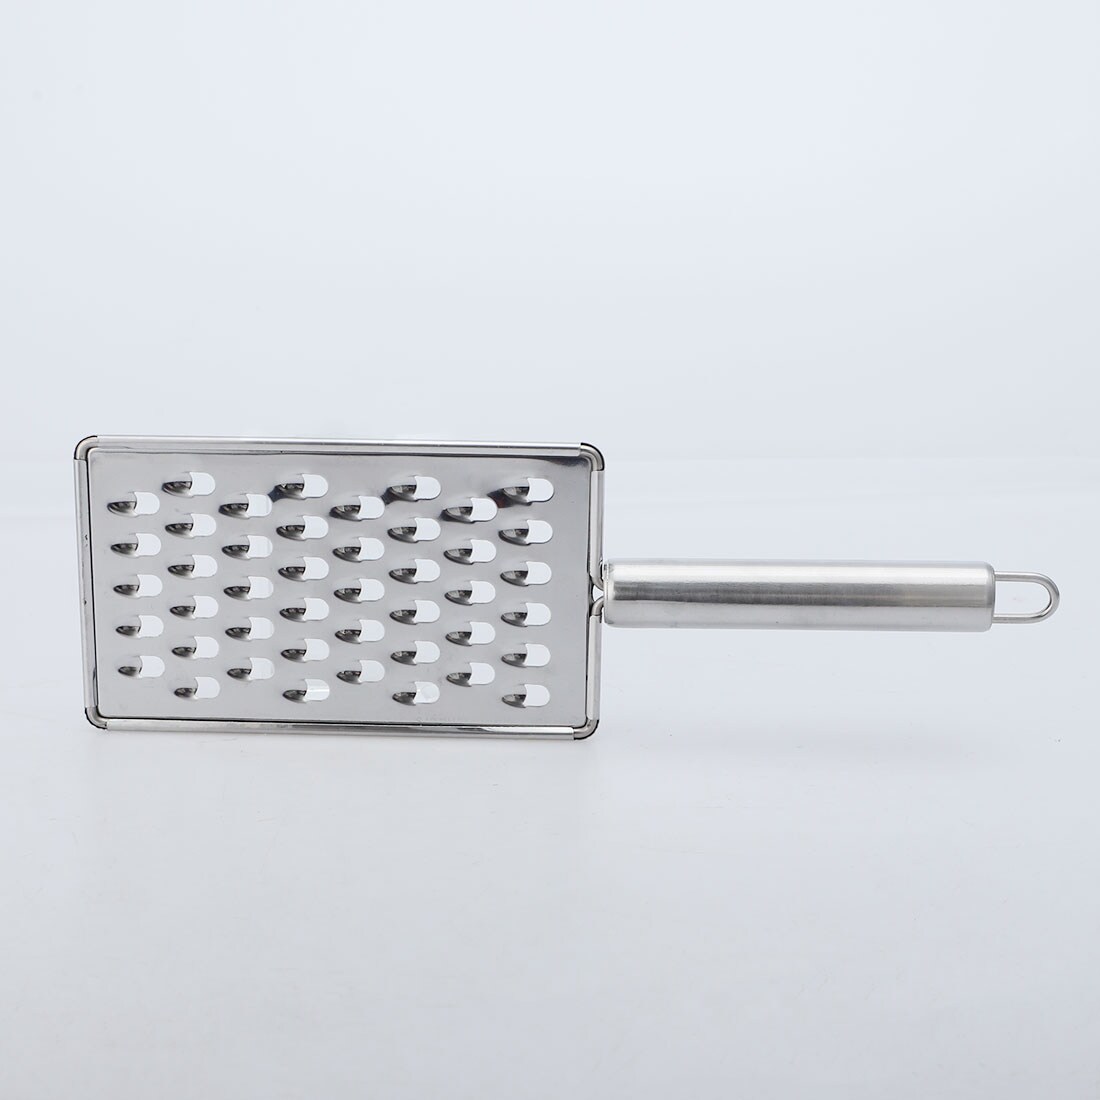 https://ak1.ostkcdn.com/images/products/is/images/direct/3a52fe510dcf85e51815027aba5c77588730be0b/Stainless-Steel-Cheese-Grater-Fruit-Vegetable-Grater-for-Kitchen-Restaurant.jpg